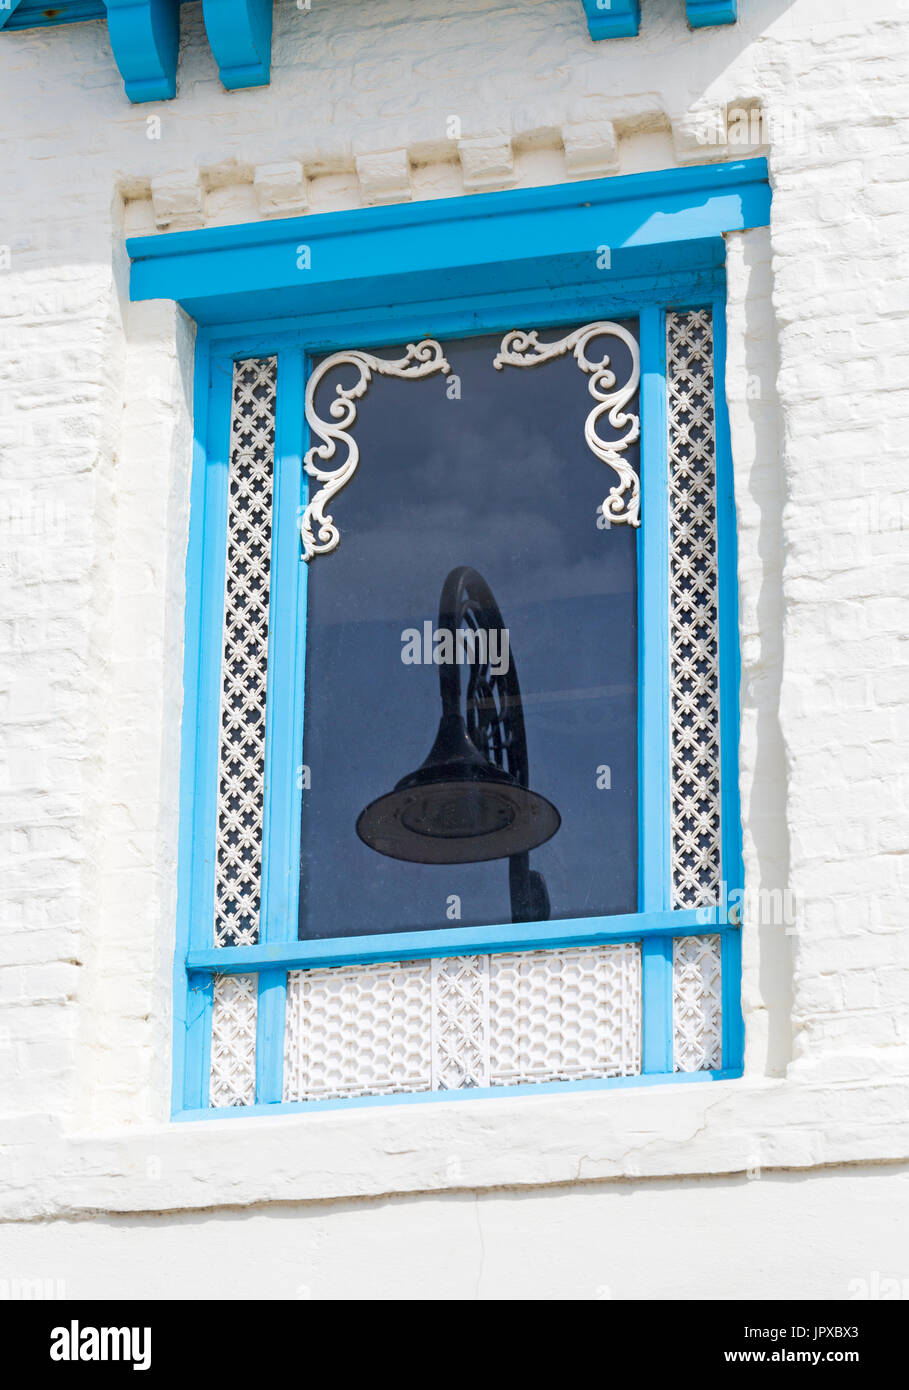 Ornate Ammonite design streetlamp, design reflects the towns location on the Jurassic Coast, reflected in building window at Lyme Regis, Dorset Stock Photo